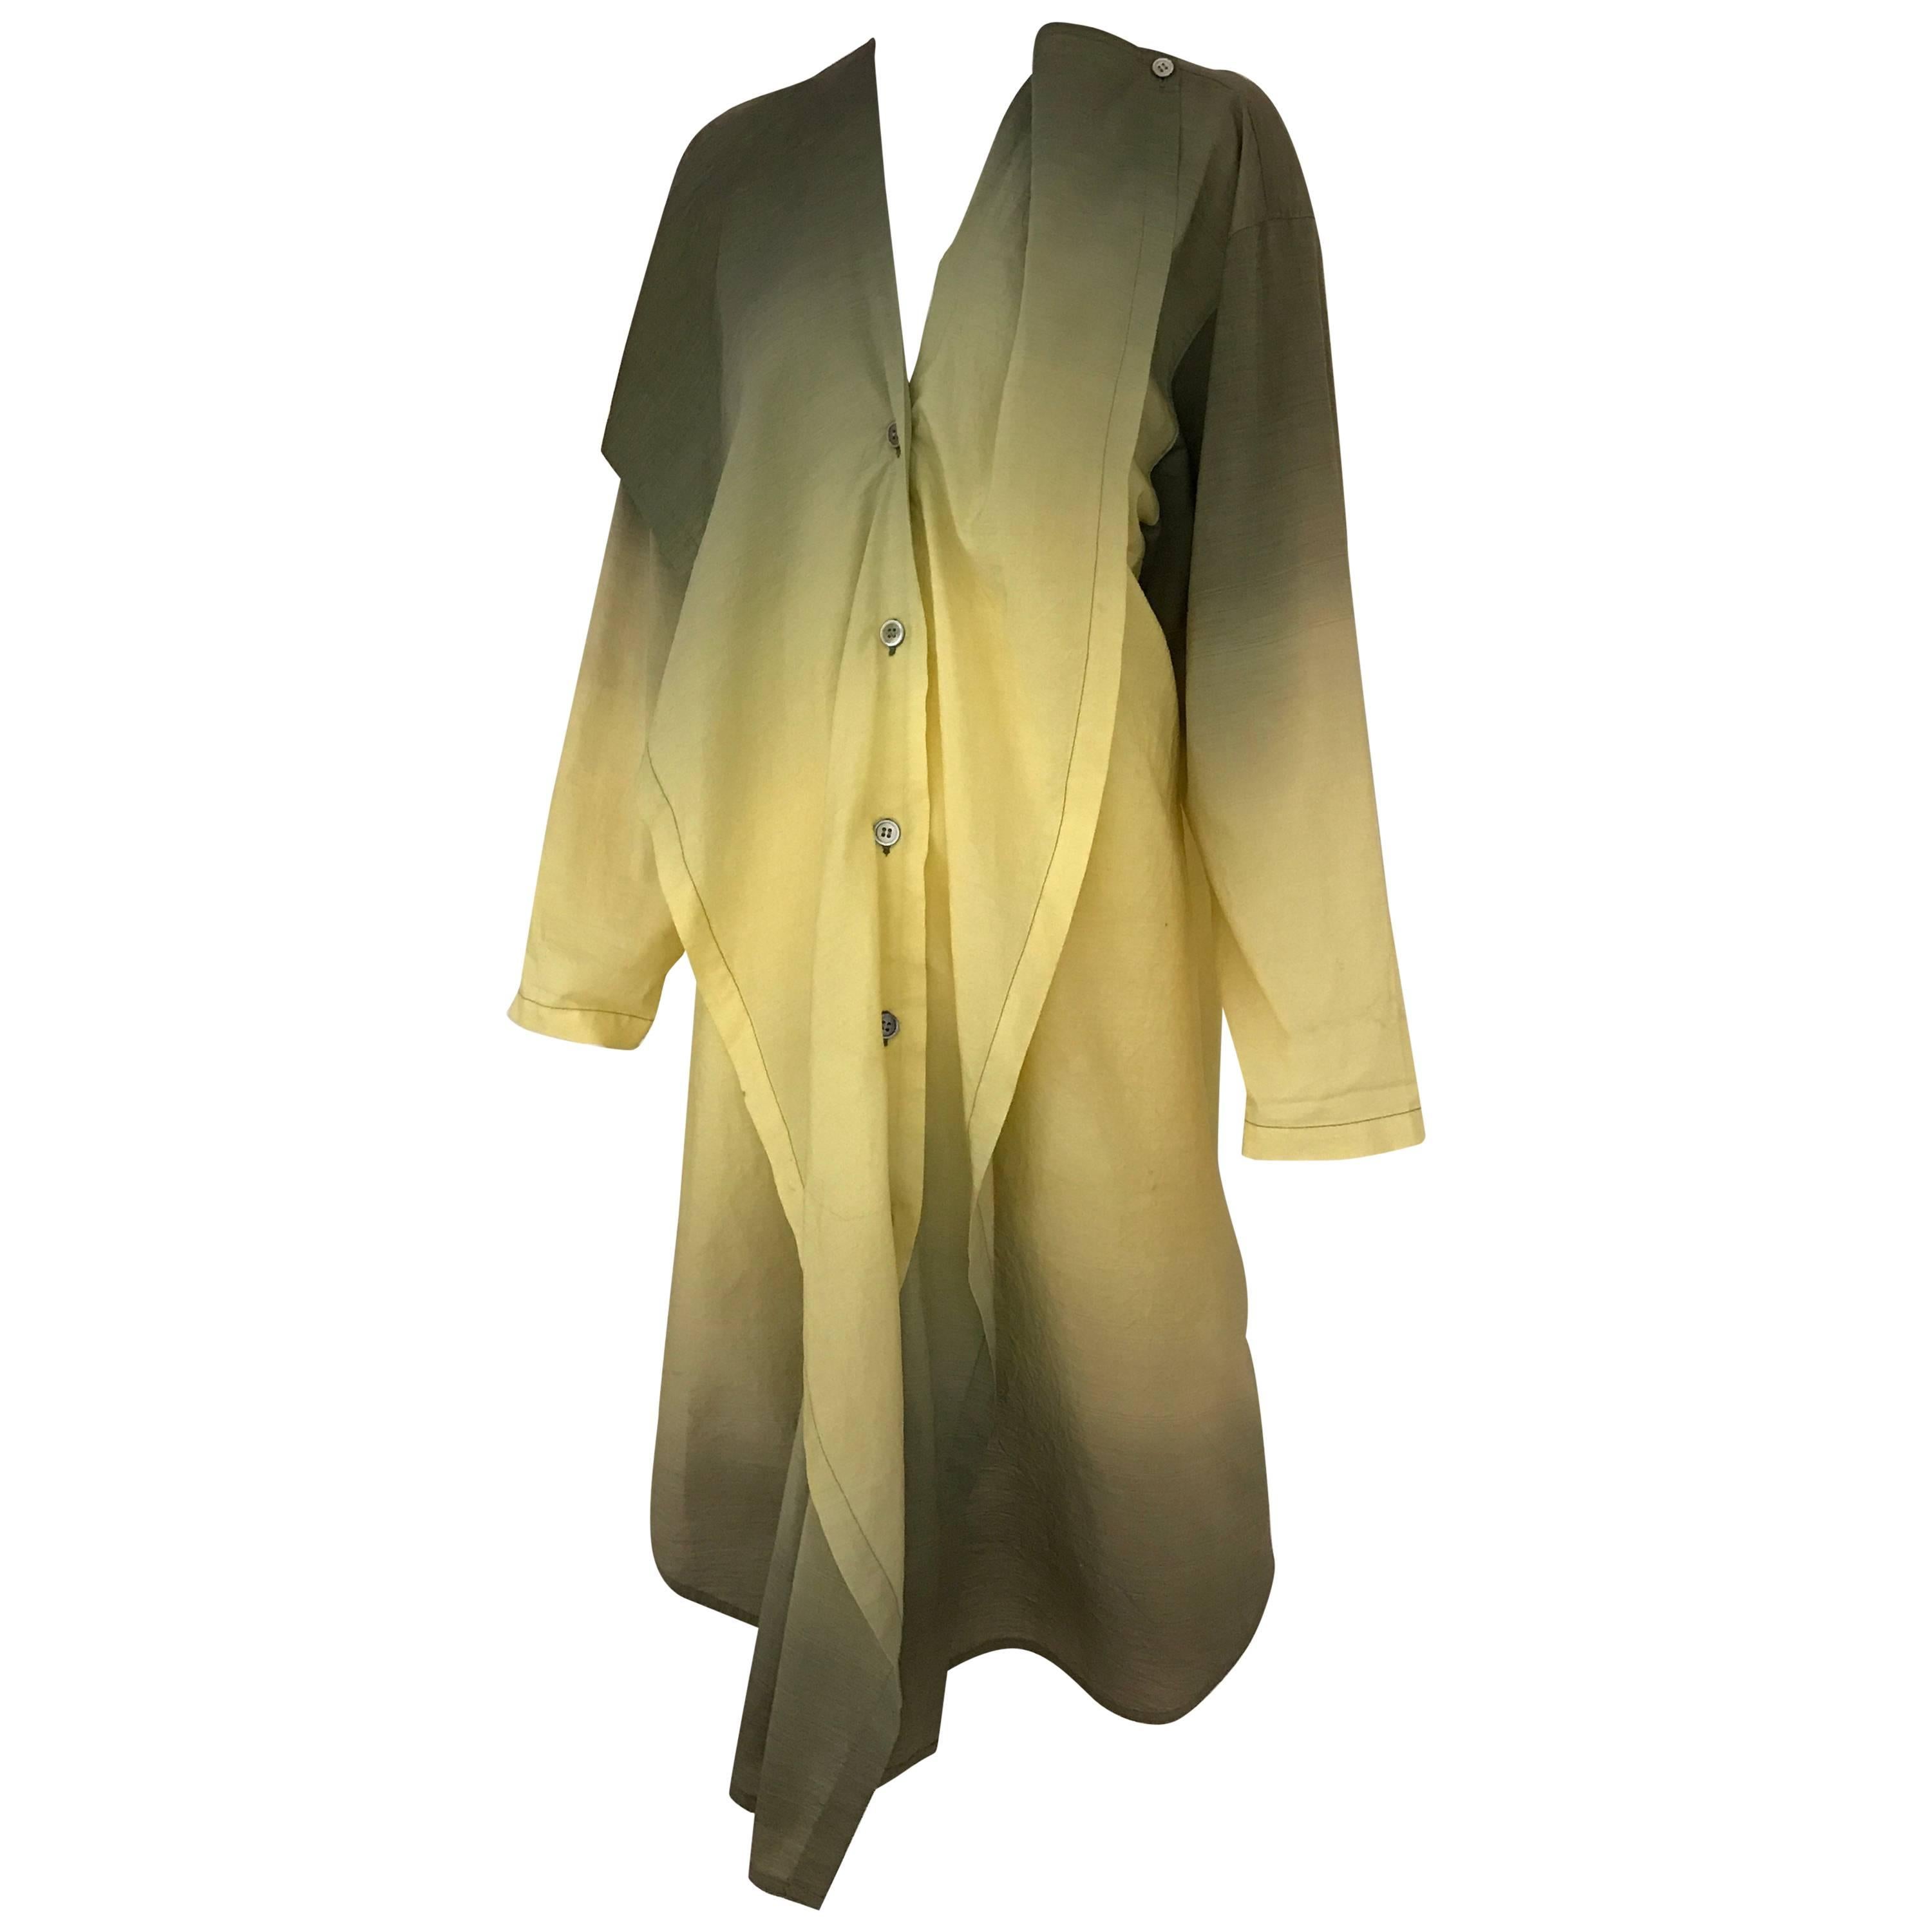 1990s ISSEY MIYAKE Green and Yellow Ombré 90s Cotton Vintage Dress